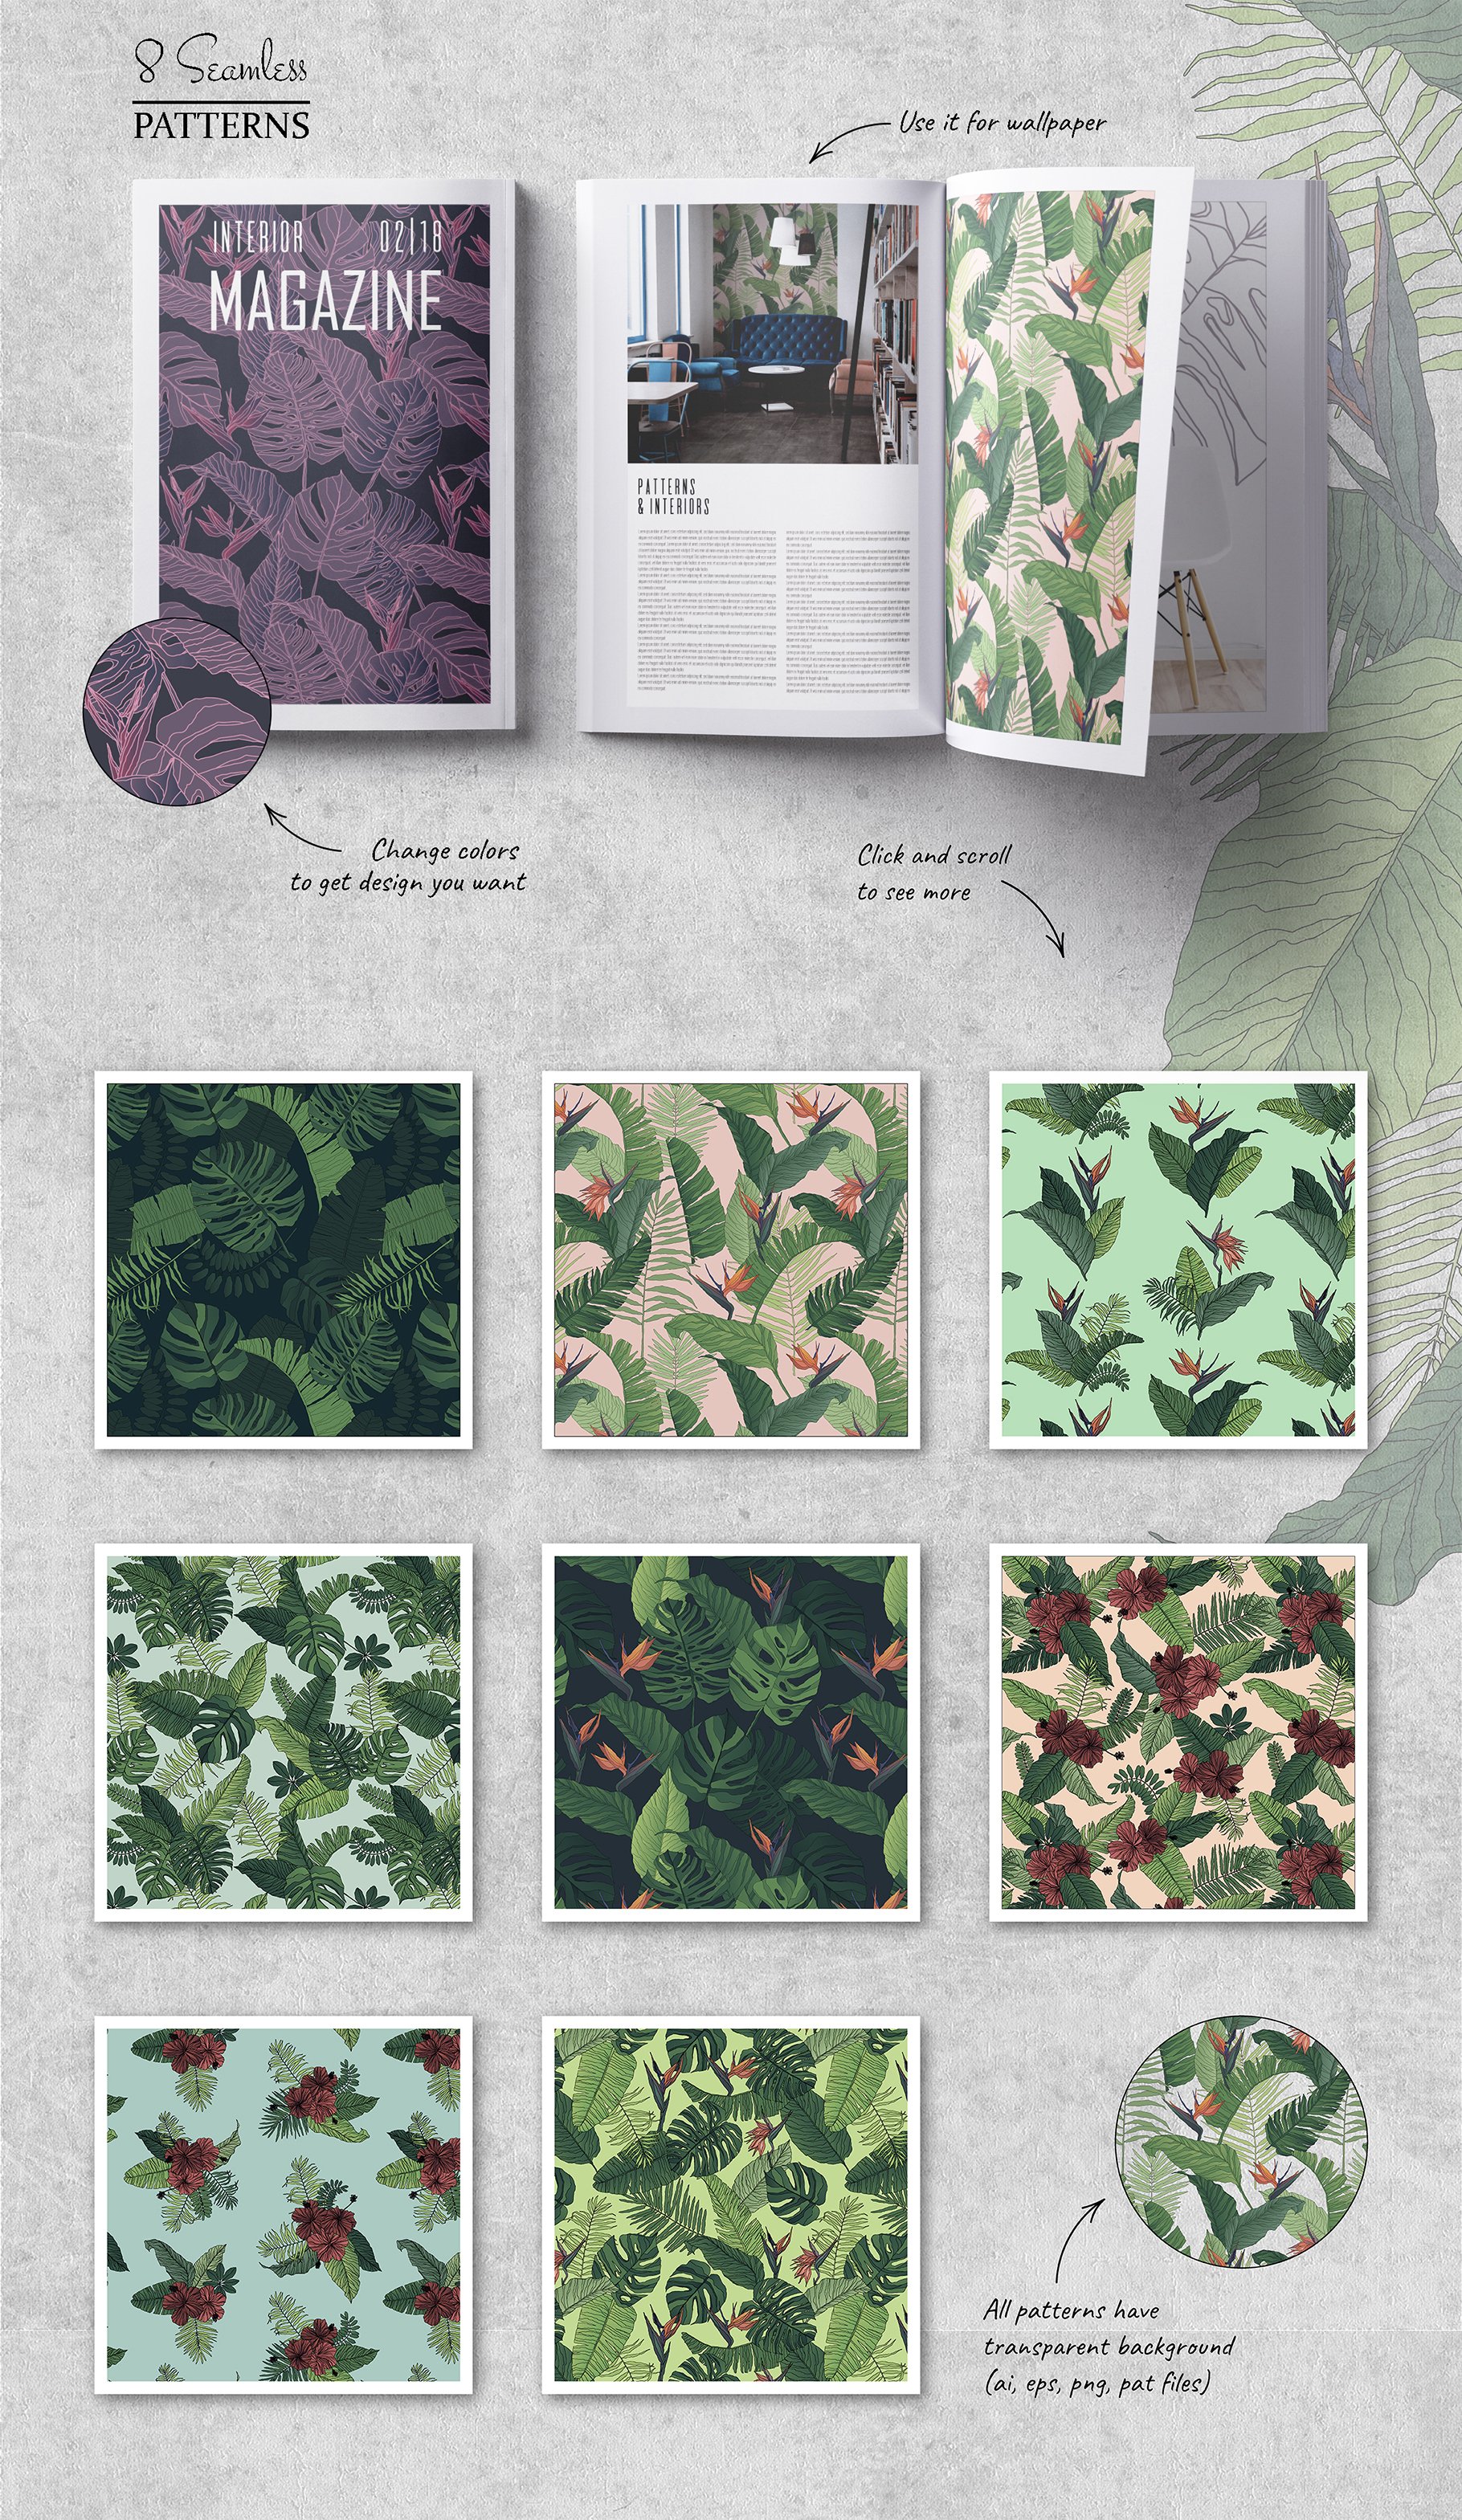 Open book with images of leaves and plants.